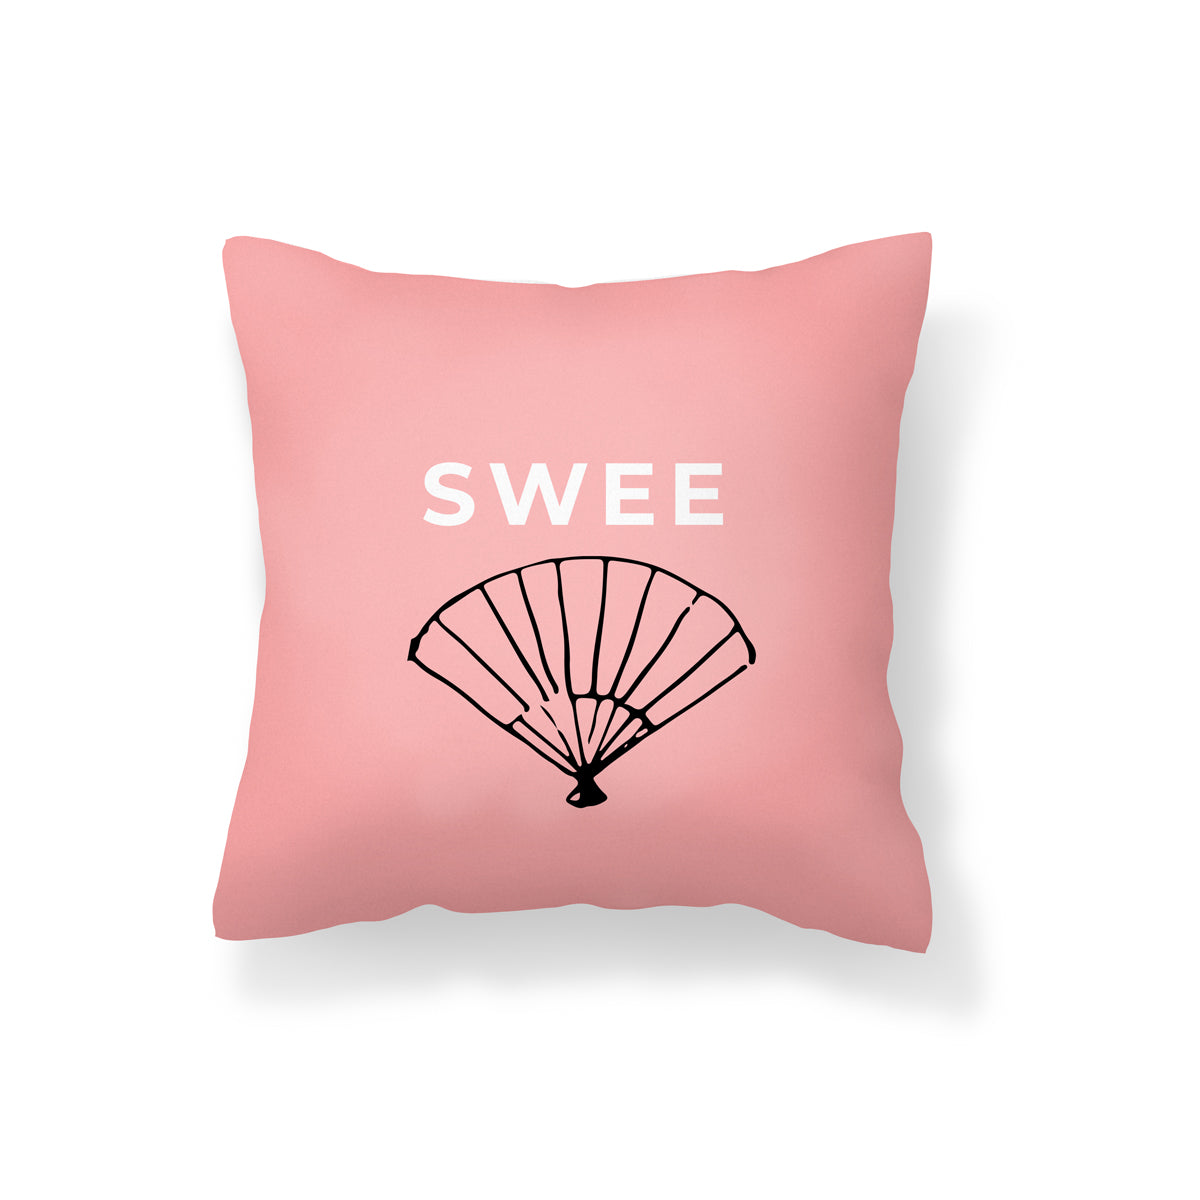 Flannel Double Sided Printed SWEE Singlish Cushion Covers PPD657D